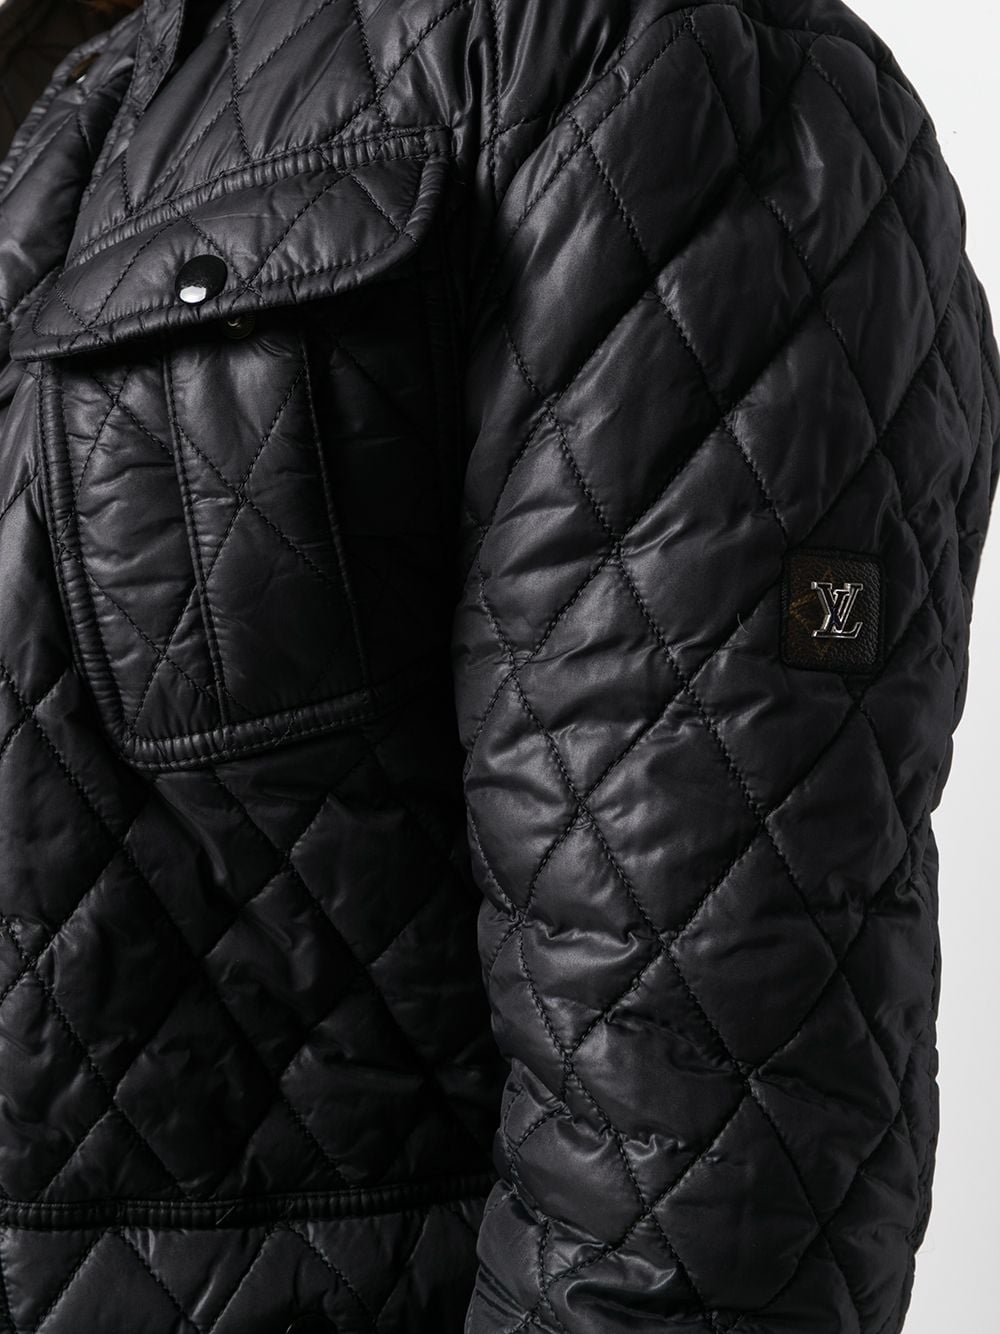 Louis Vuitton 2000s Quilted Jacket - Farfetch